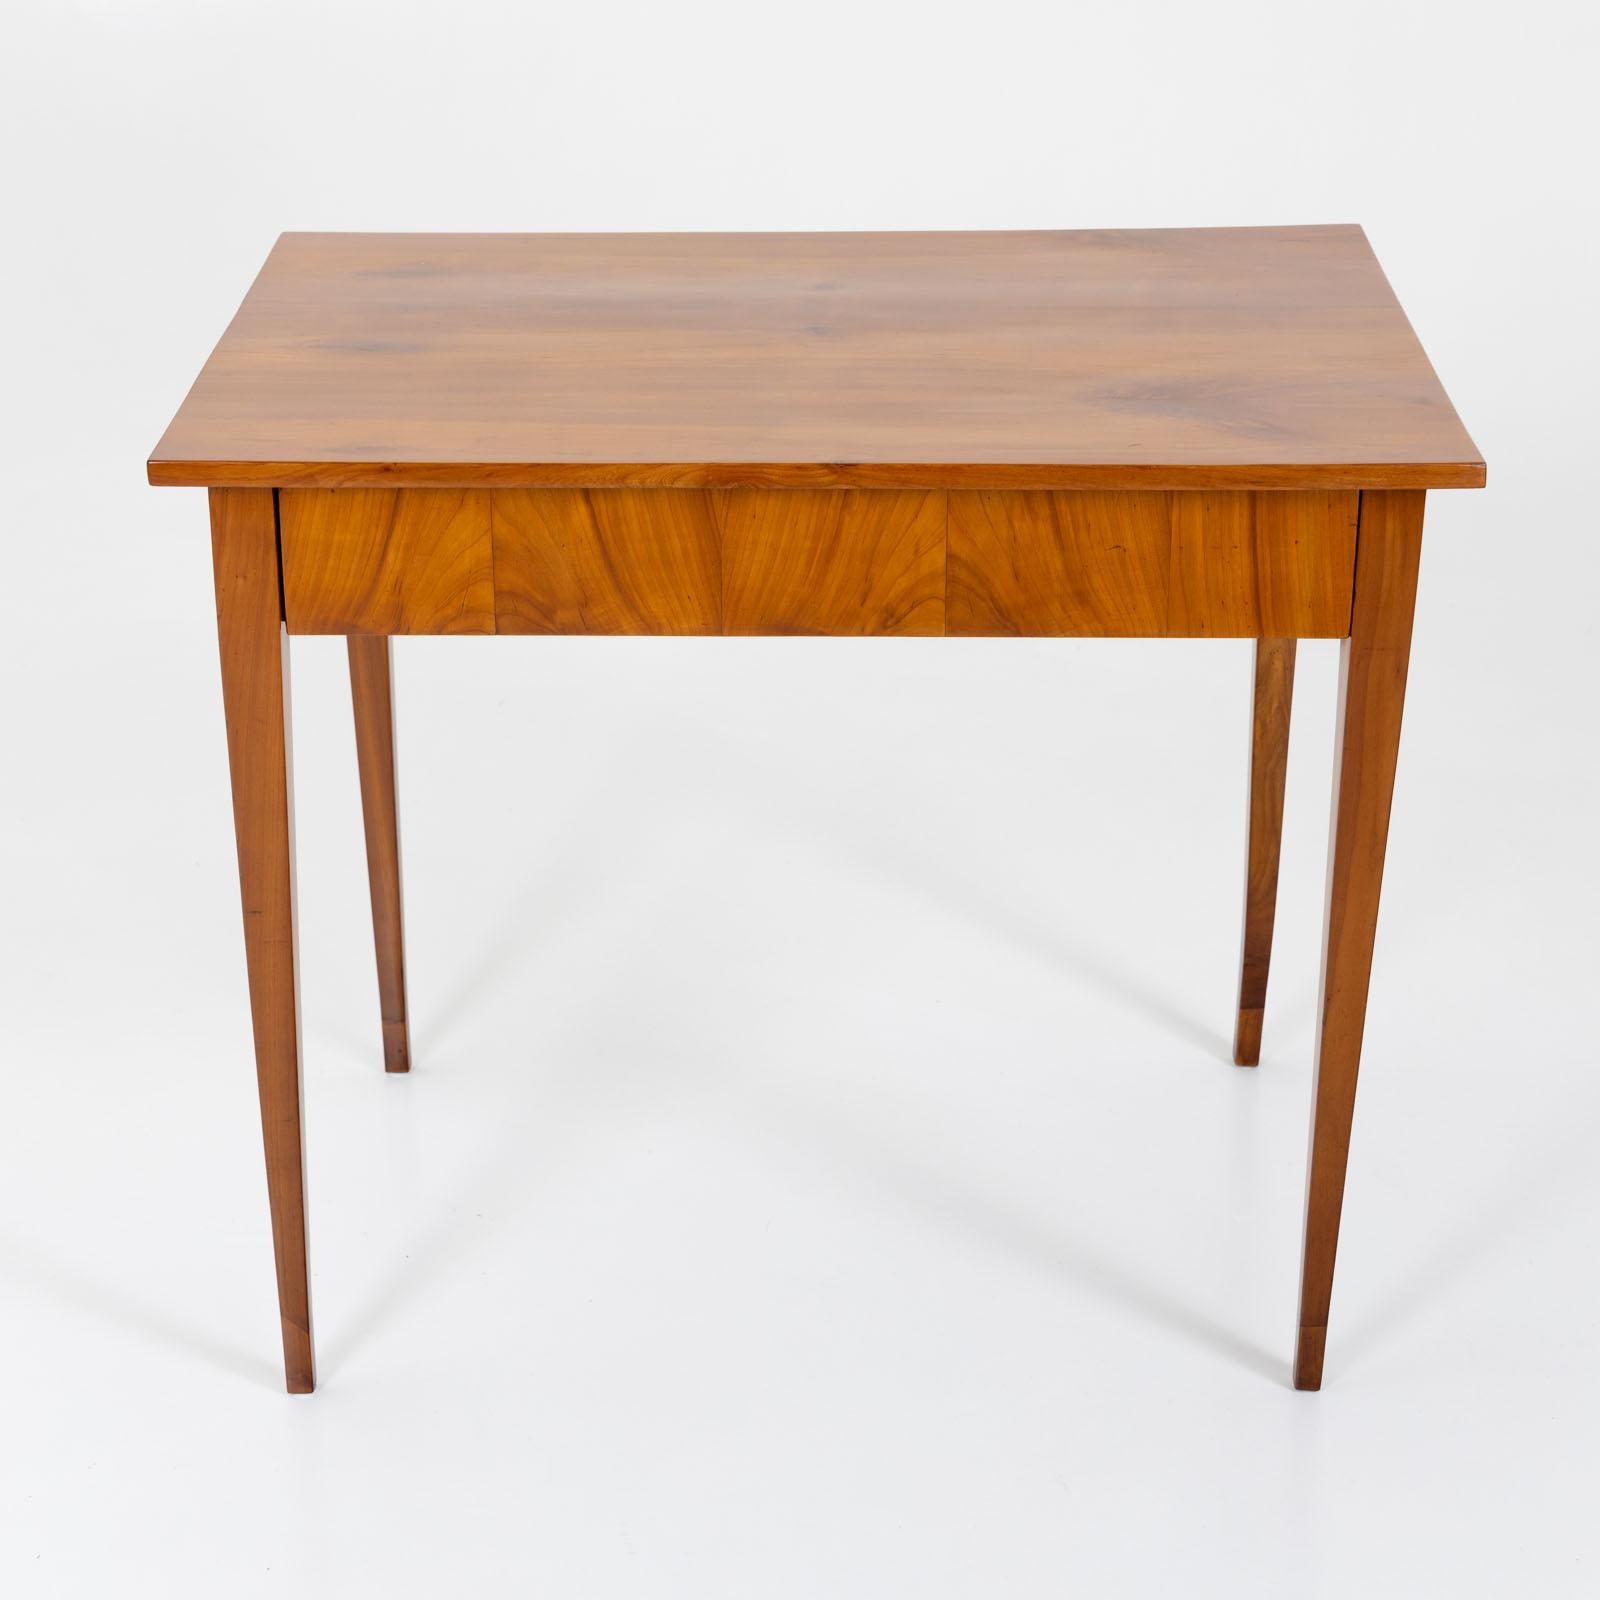 Biedermeier side table in cherry with one drawer and rectangular table top. The table stands on high square tapered legs and has been expertly restored and polished by hand. 